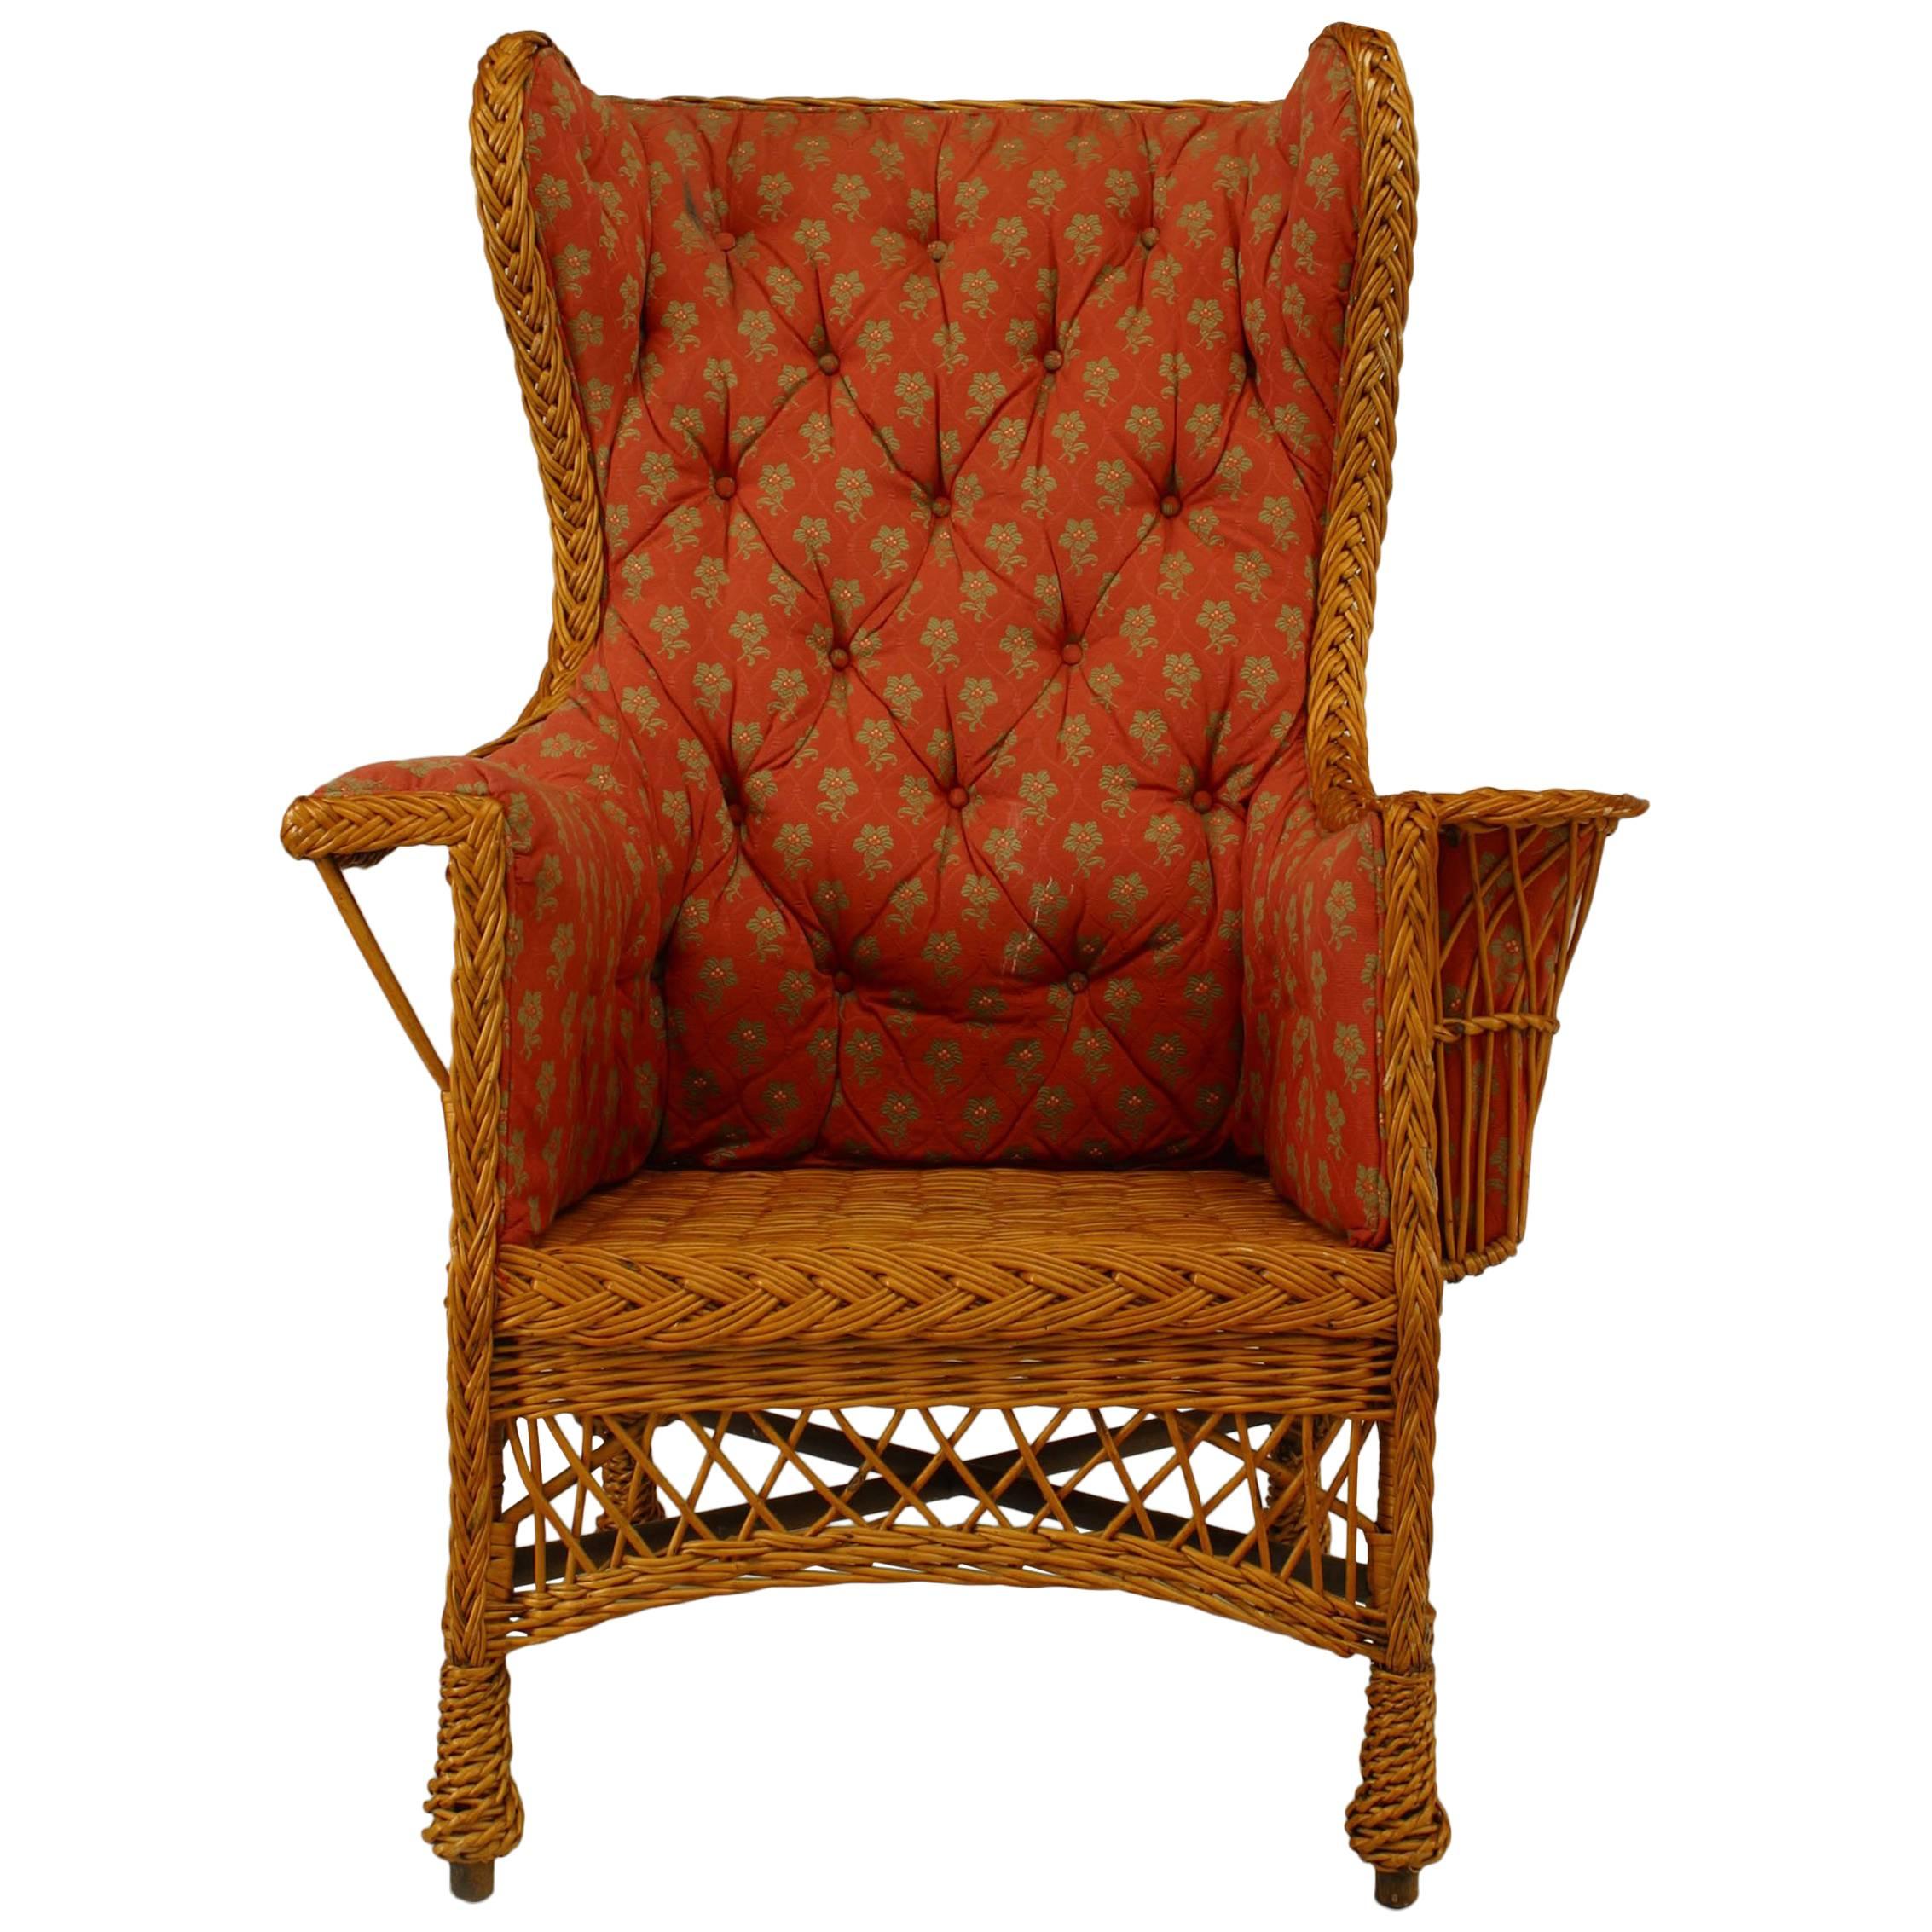 American Victorian Wicker Wing Chair